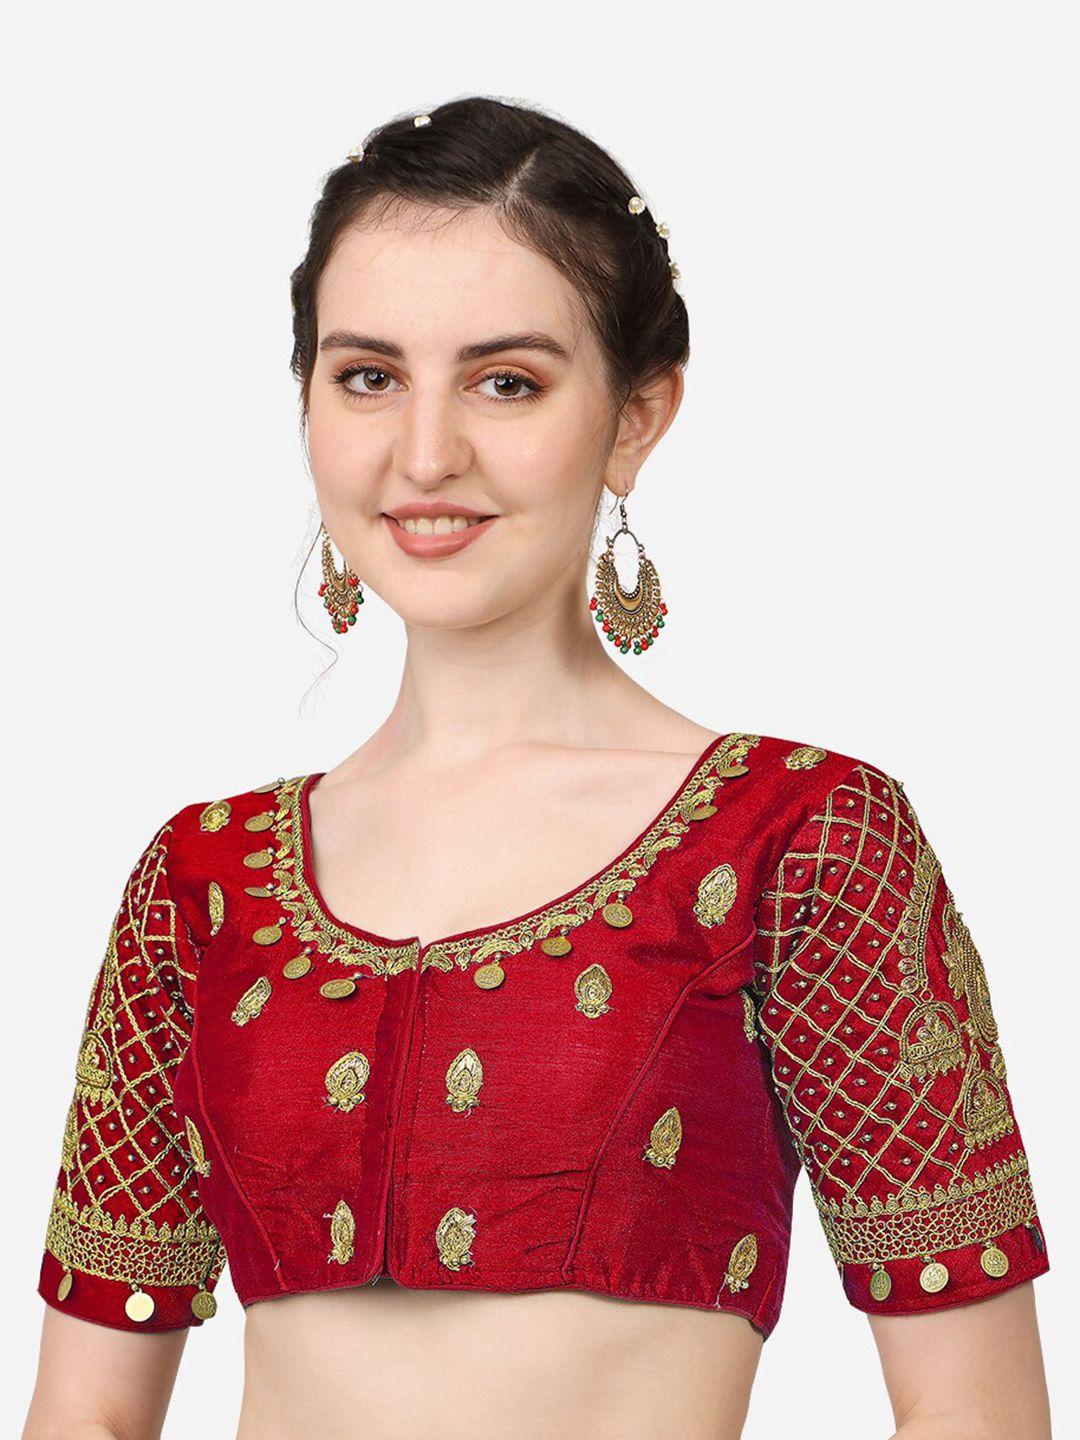 pujia mills women red & gold embroidered saree blouse